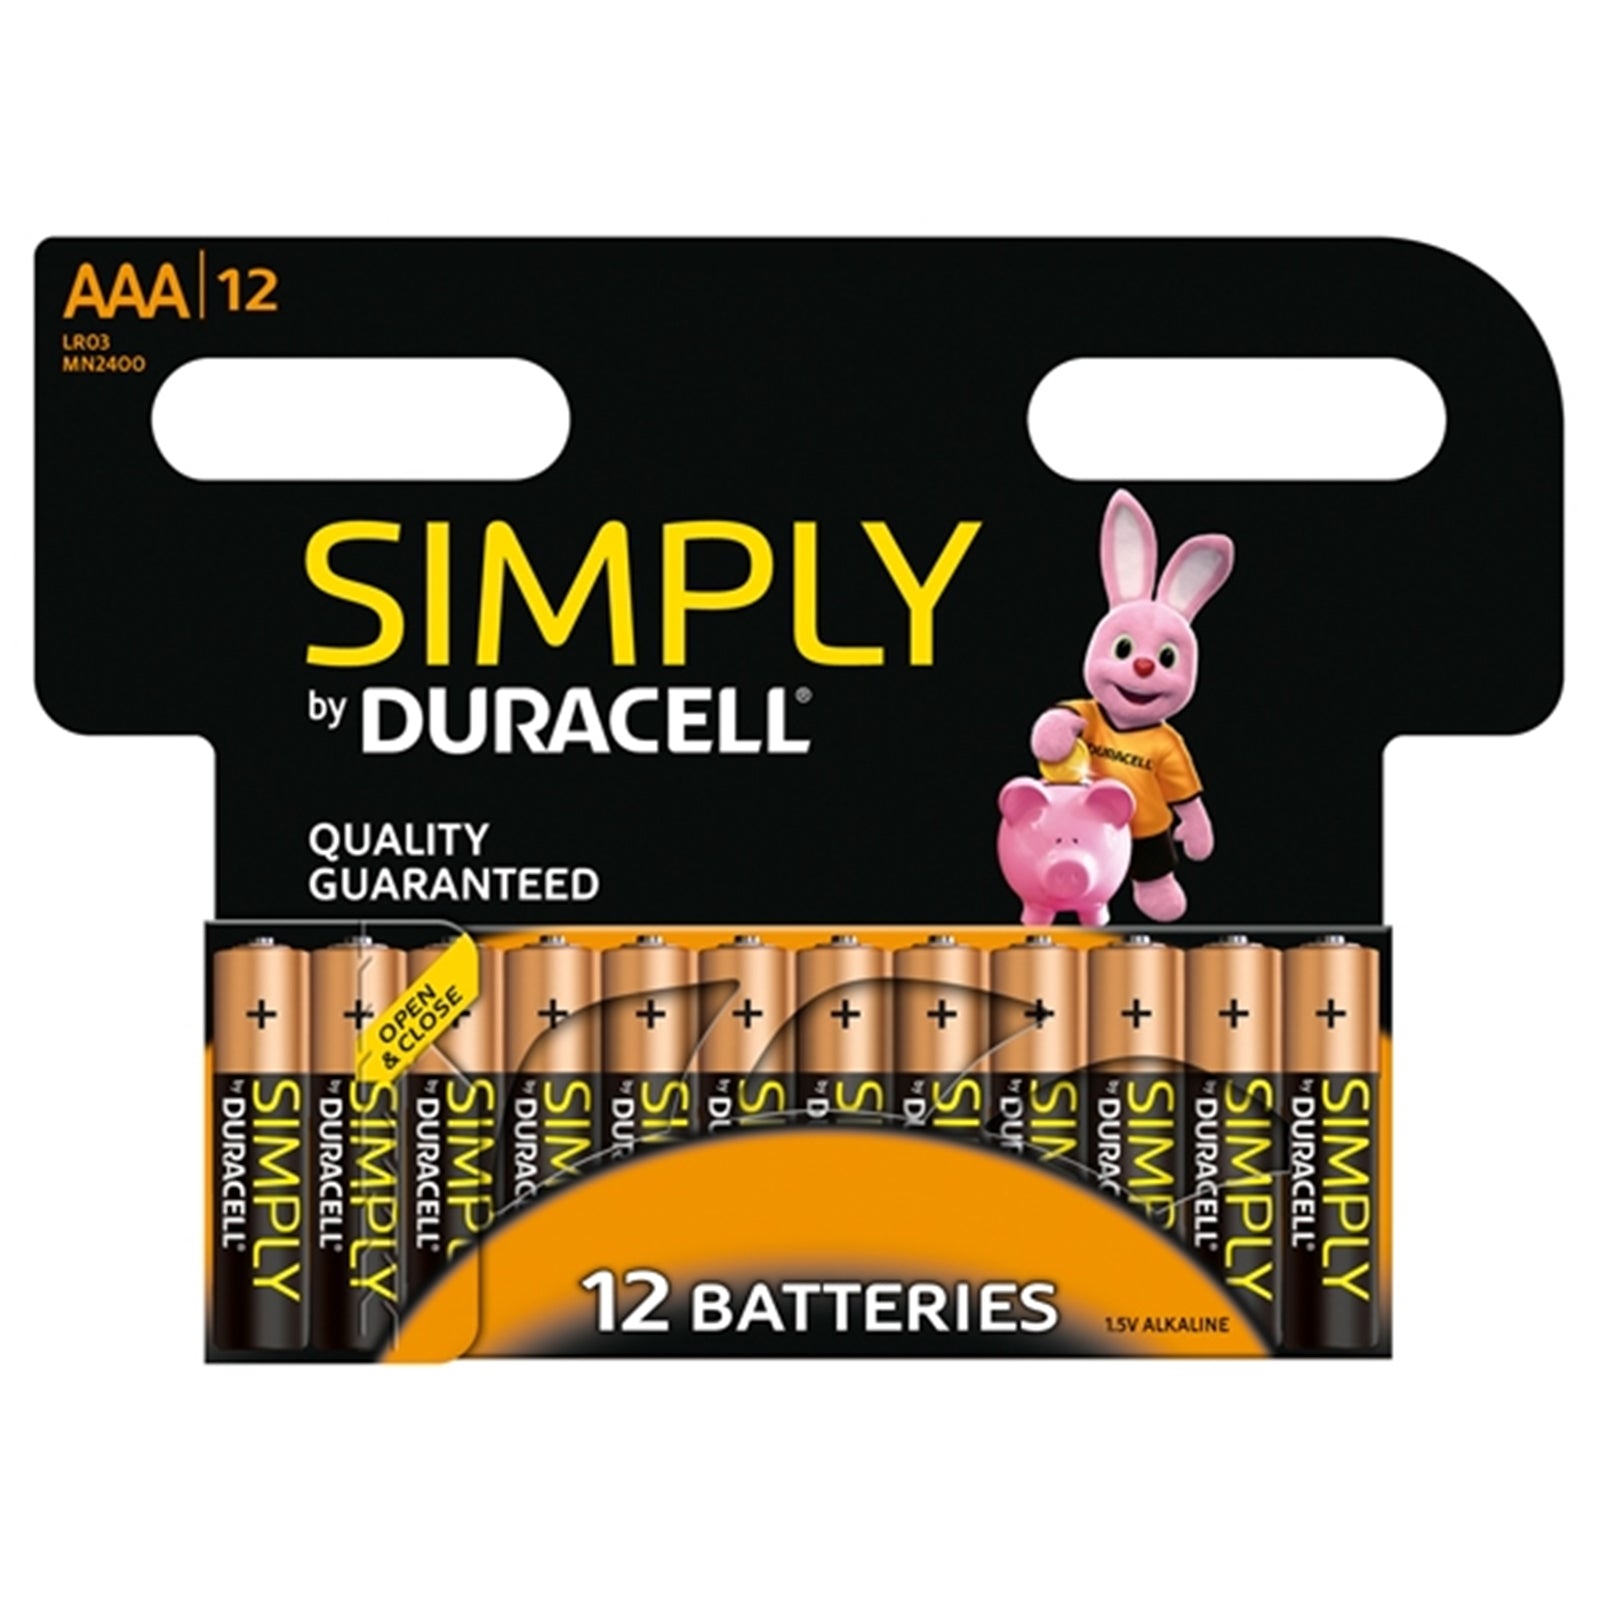 Duracell Simply AAA Alkaline Batteries 12-Pack for Everyday Use